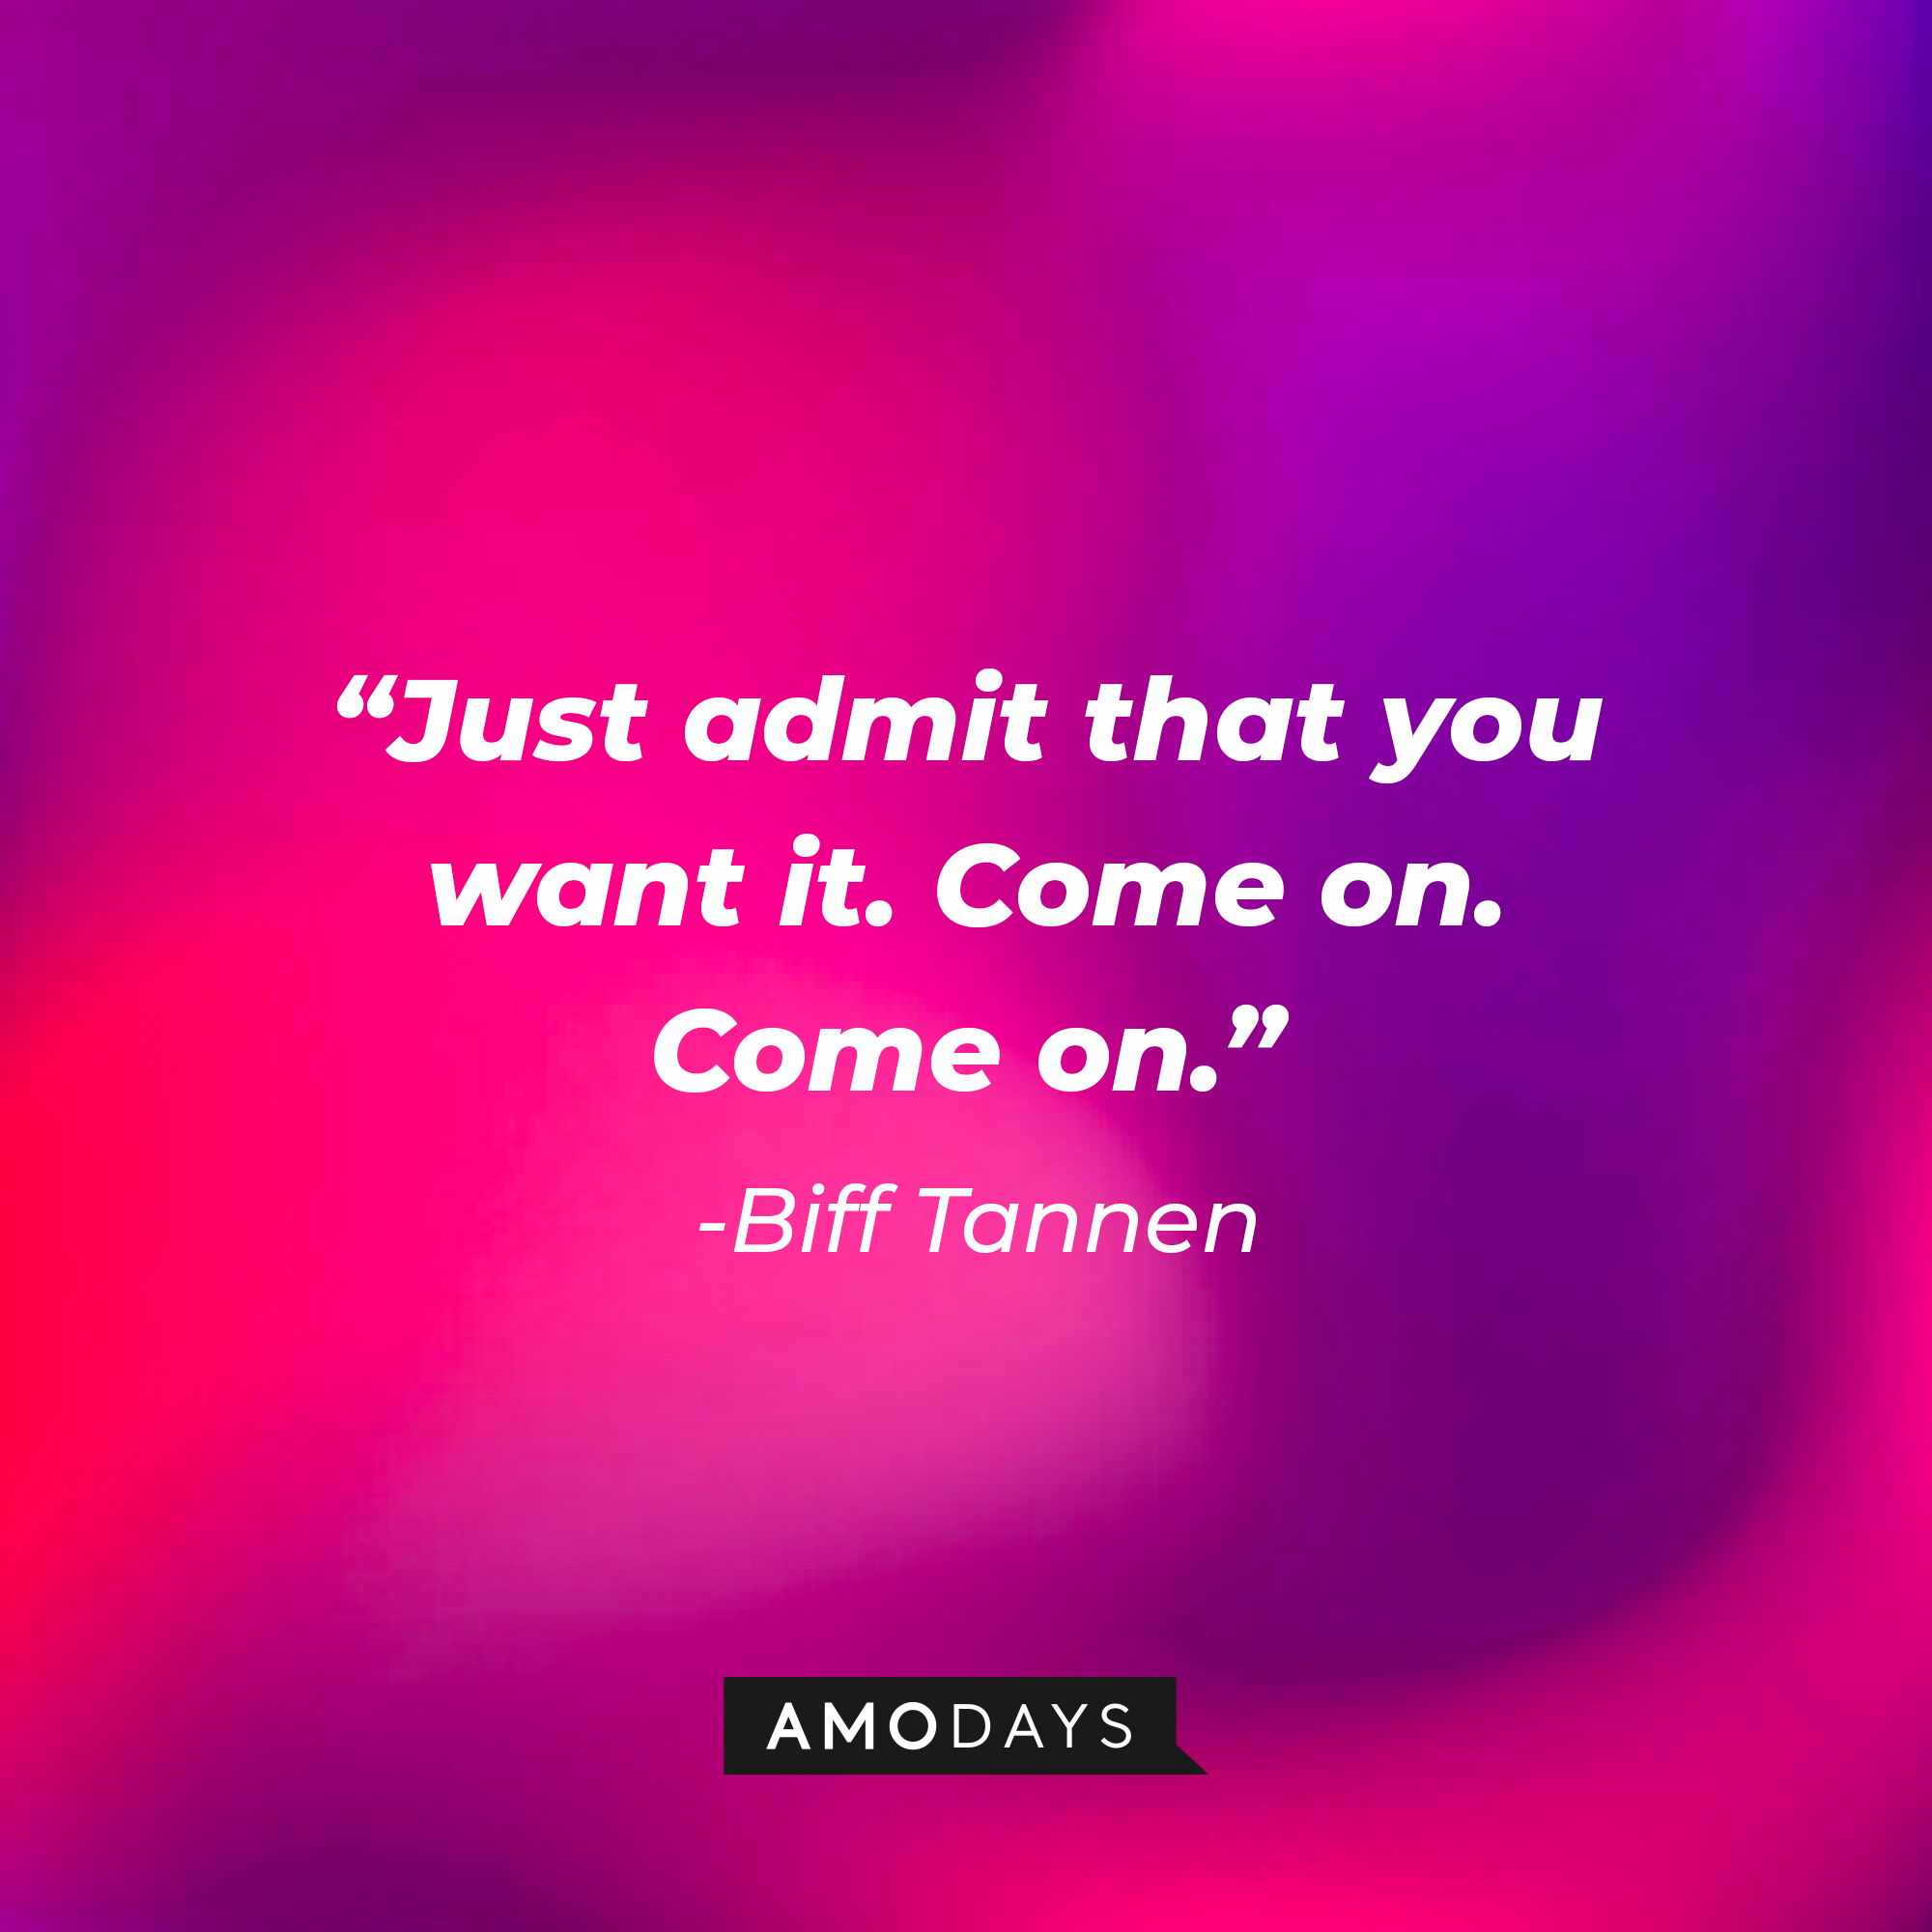 Biff Tannen’s quote: “Just admit that you want it. Come on. Come on.” | Source: AmoDays